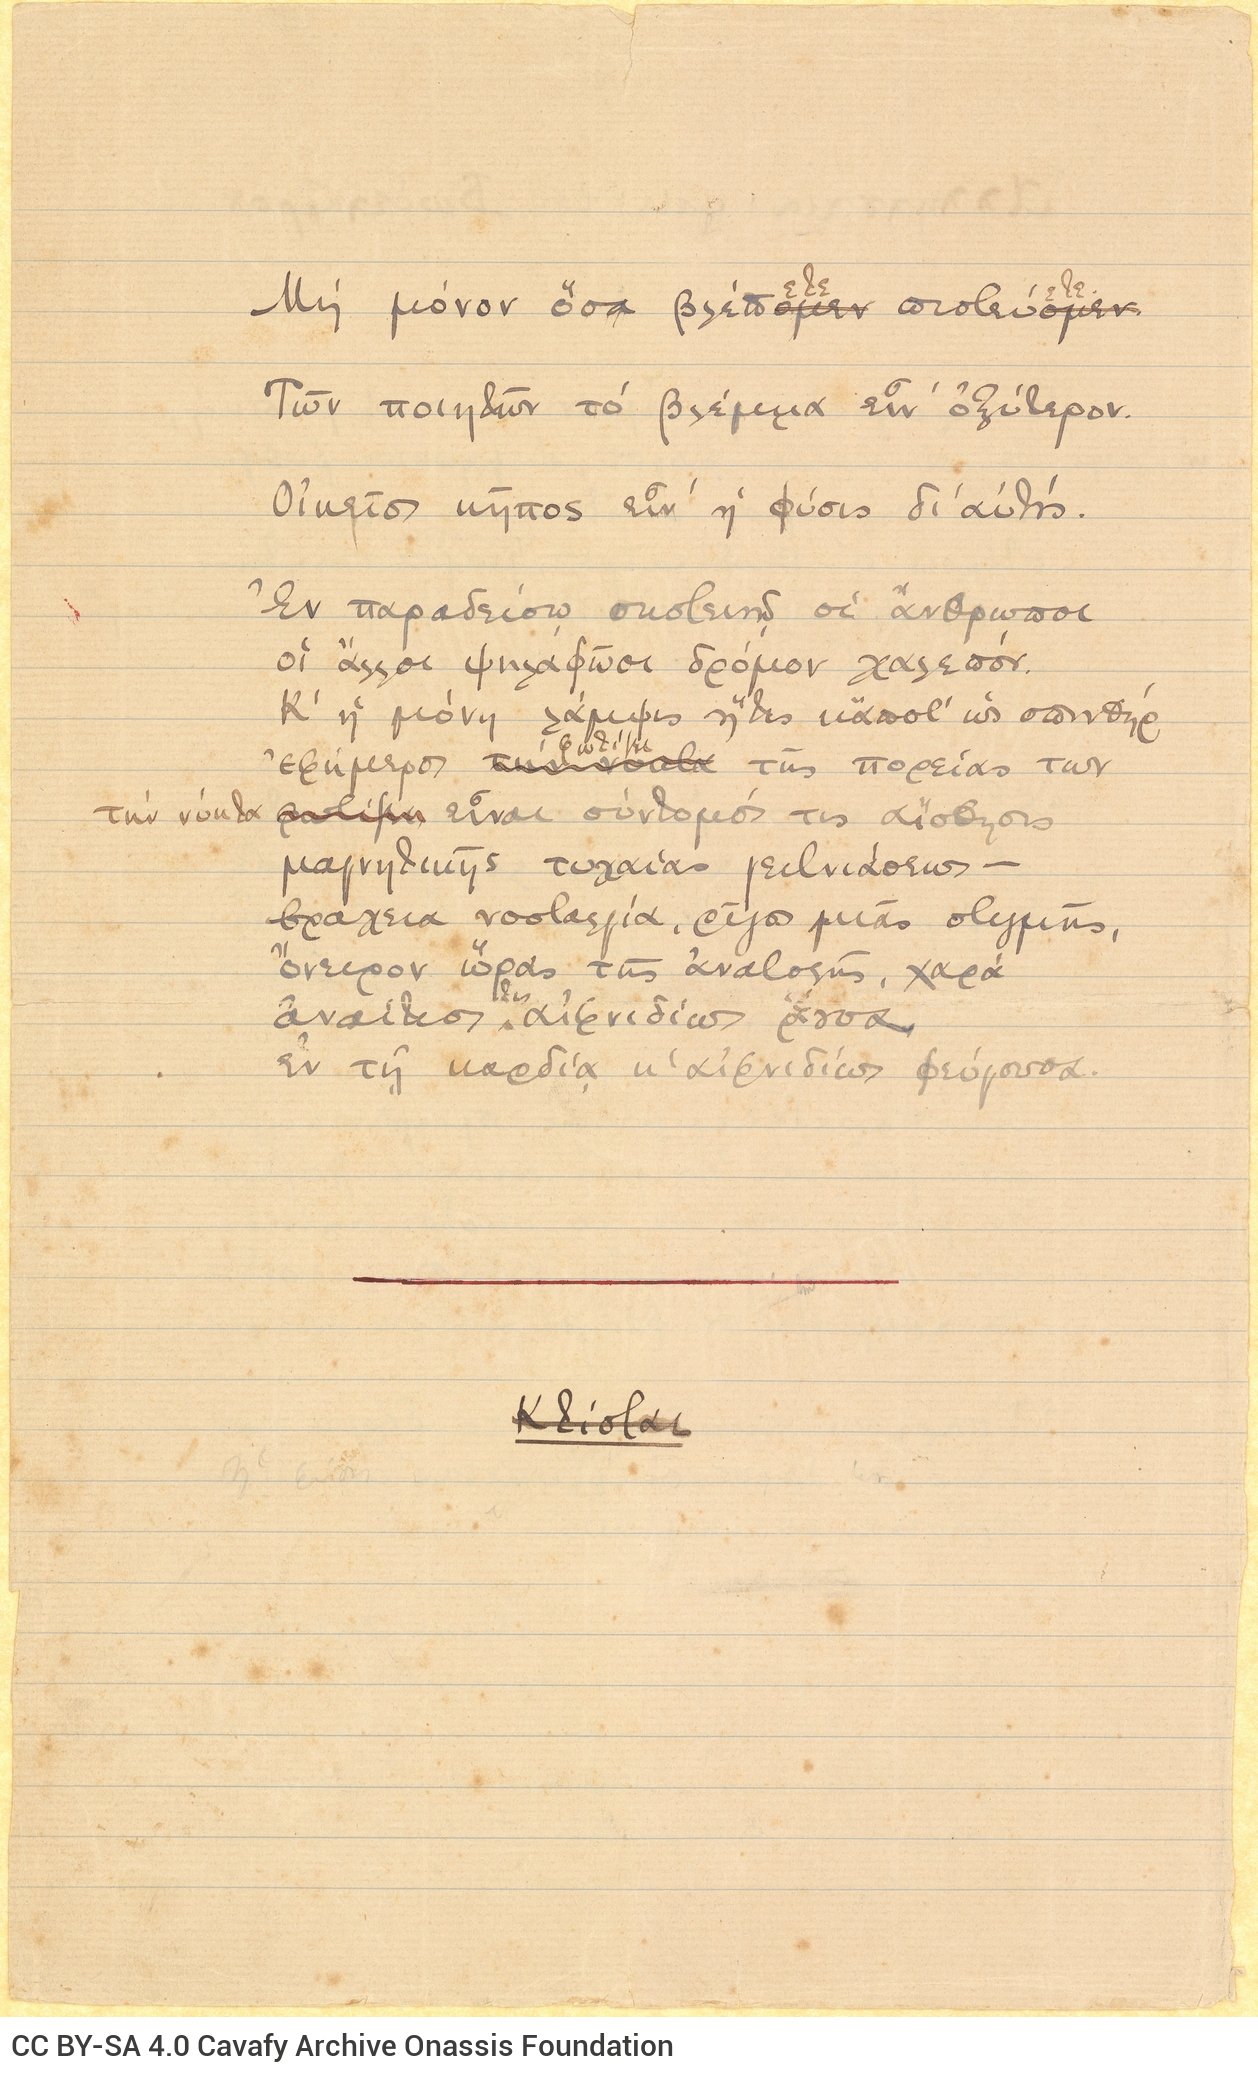 Manuscript of the poem "Correspondences According to Baudelaire" on both sides of a ruled sheet. Cancellations and emendat